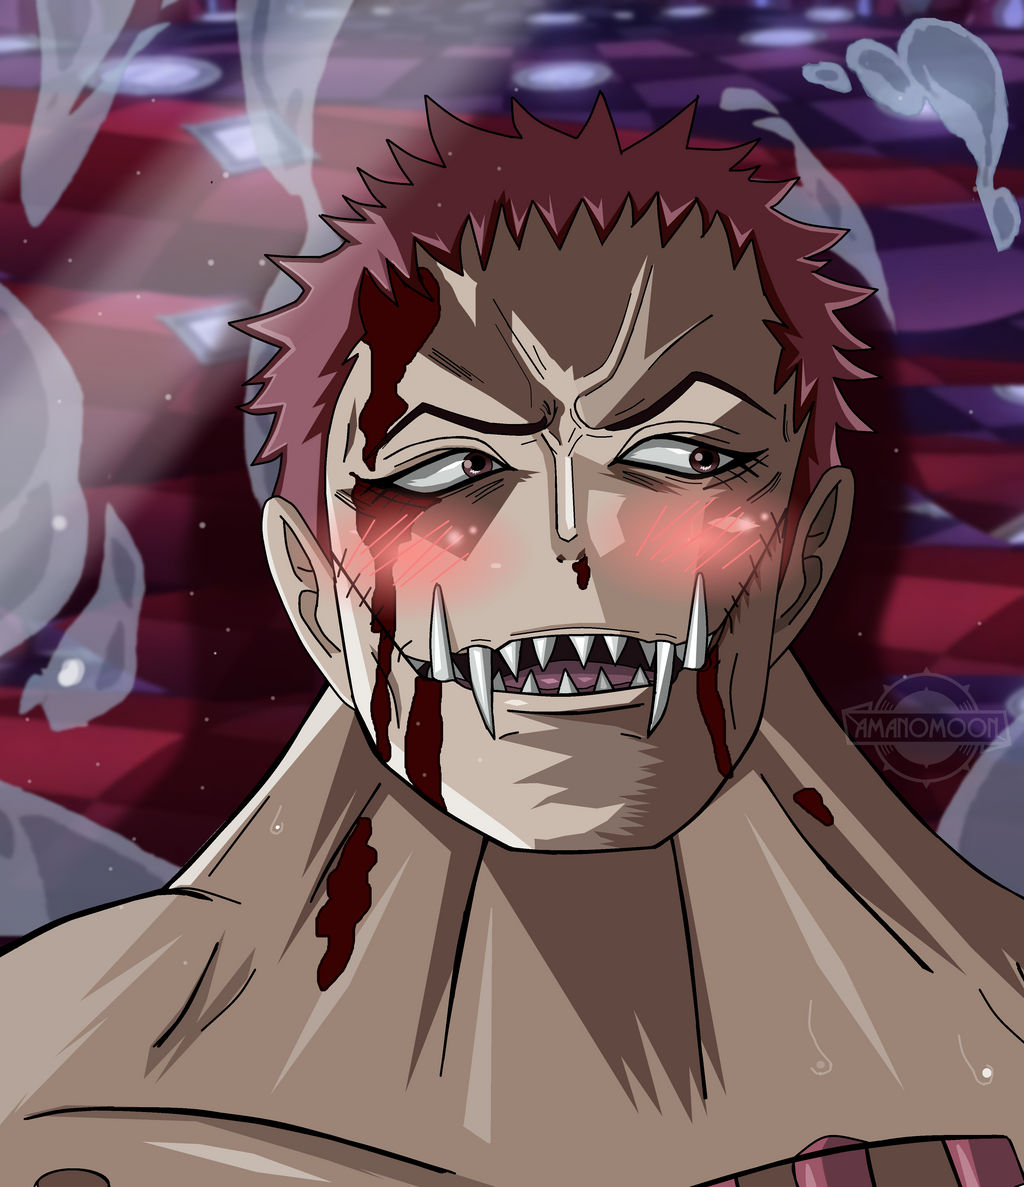 One Piece Chapter 902 Katakuri Brulee Smile Colors By Amanomoon On Deviantart